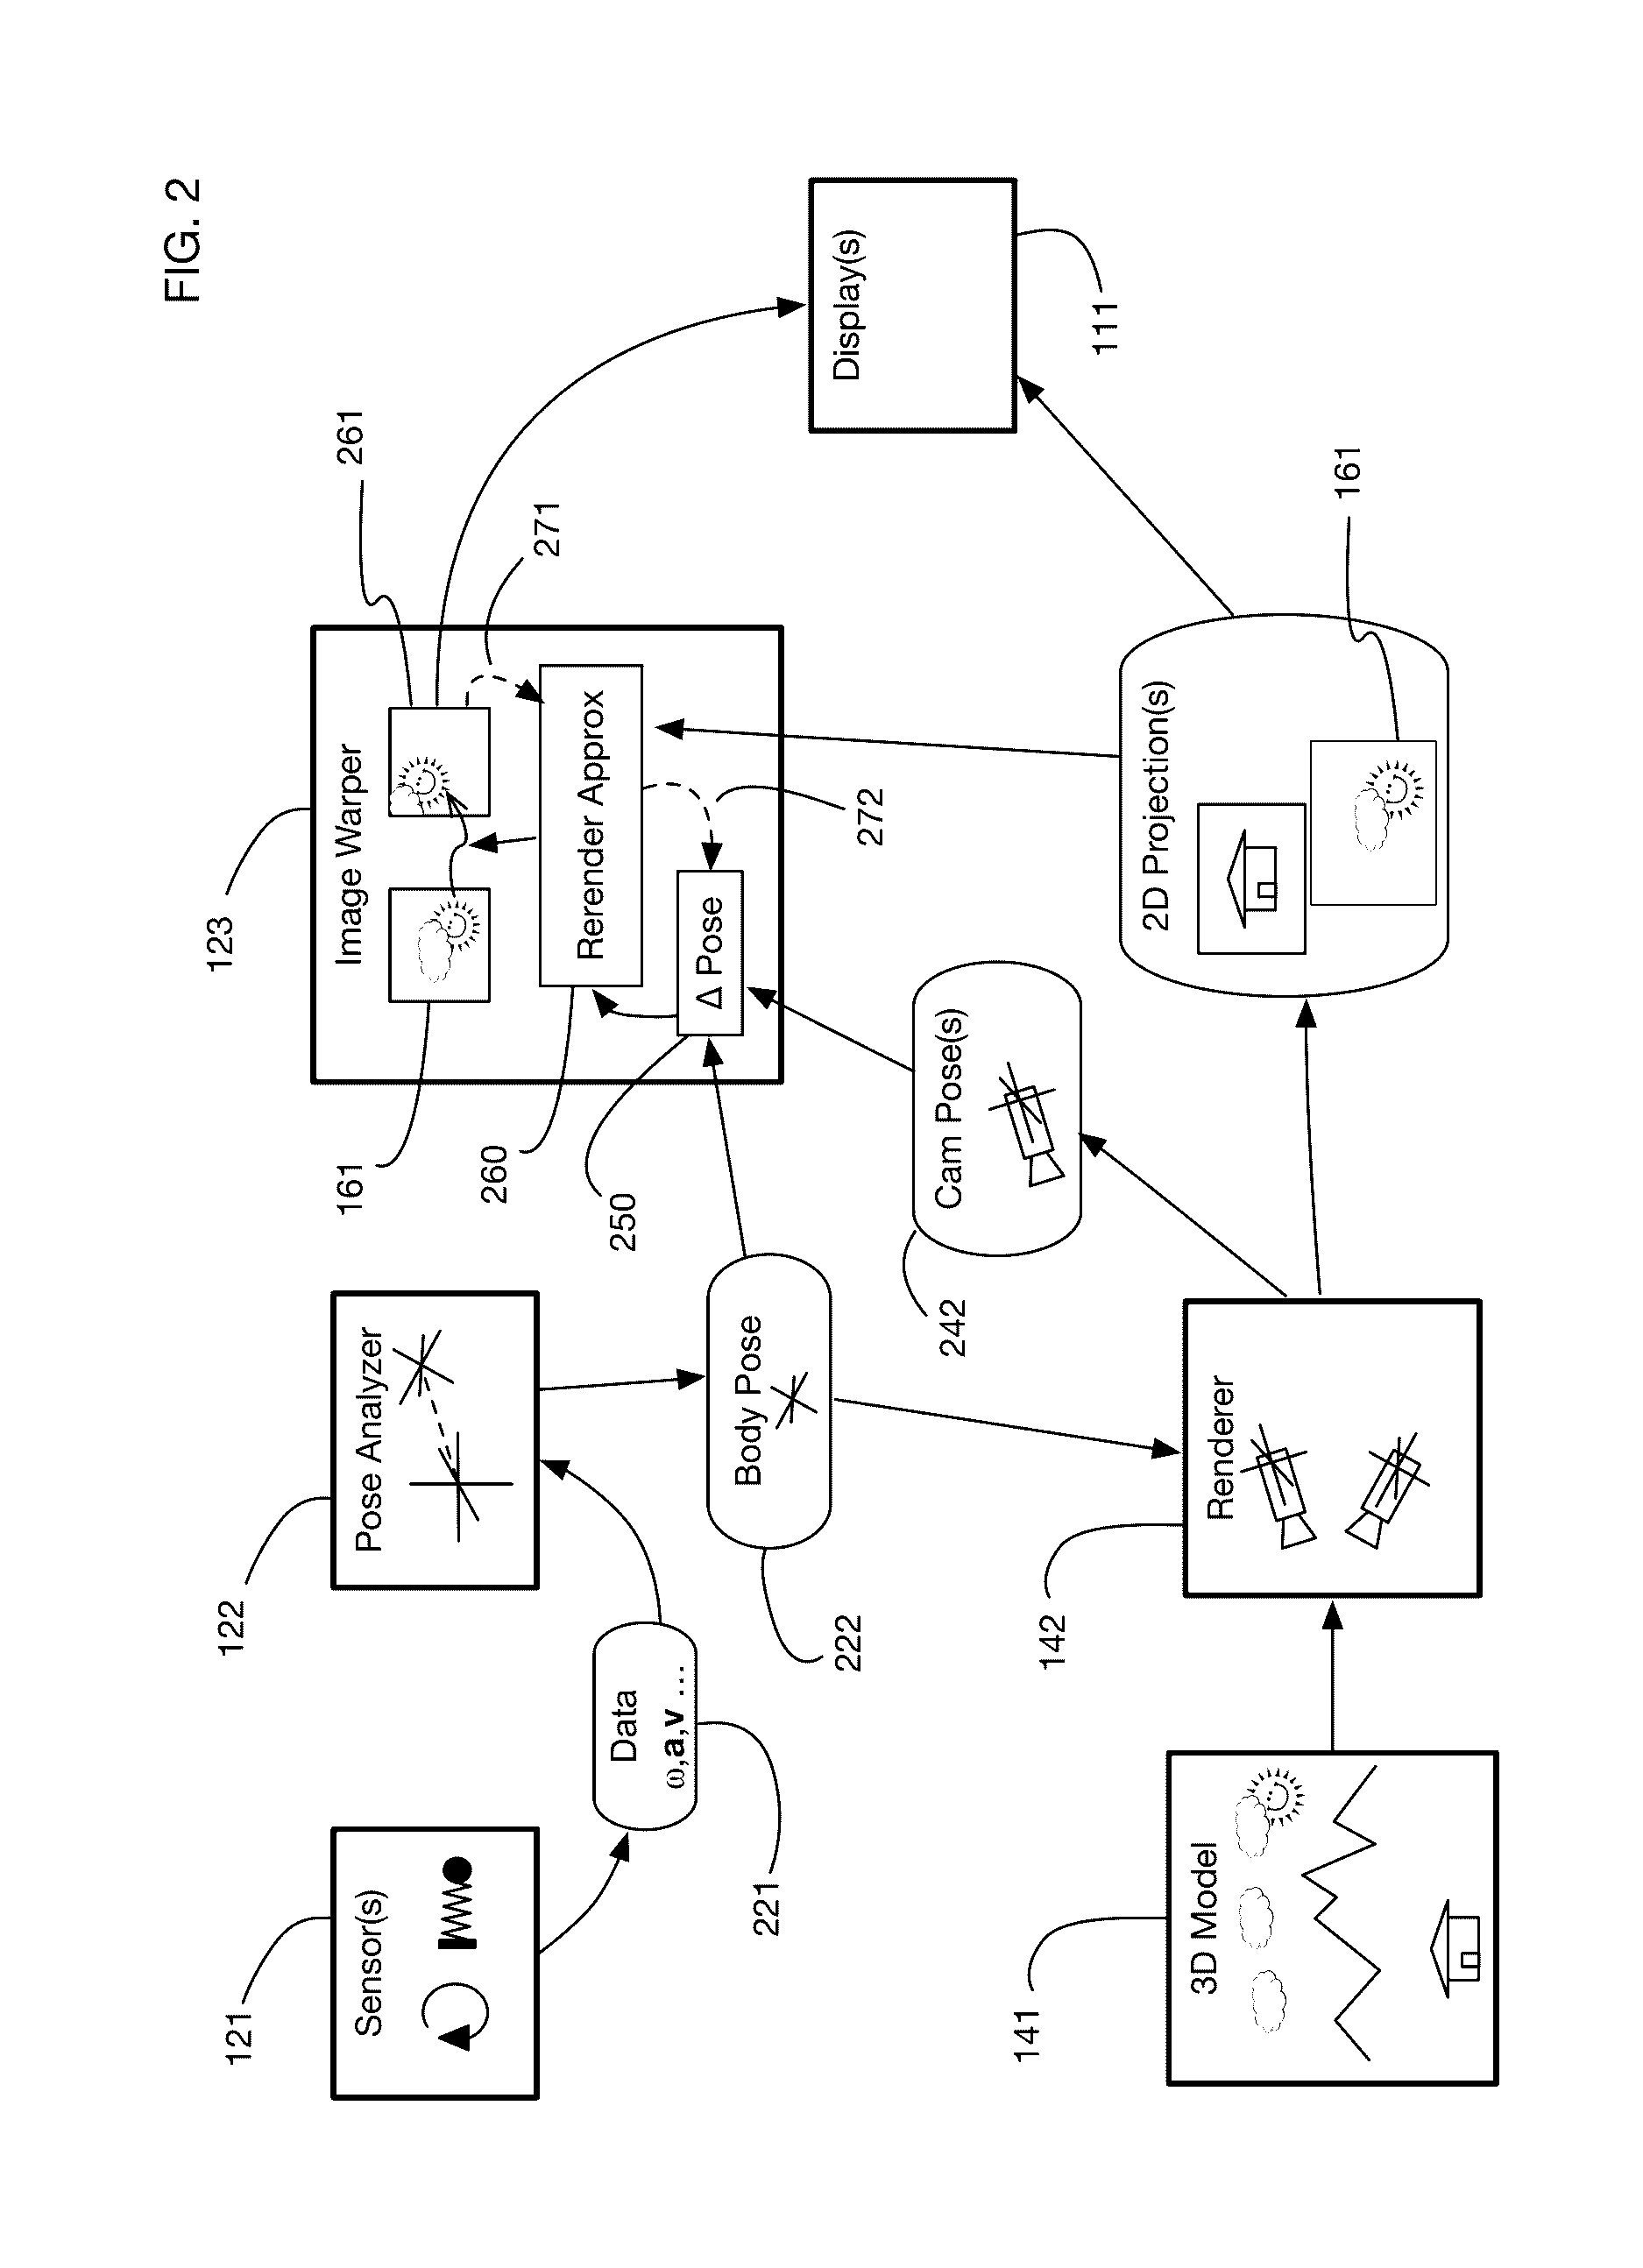 Virtual reality system with control command gestures